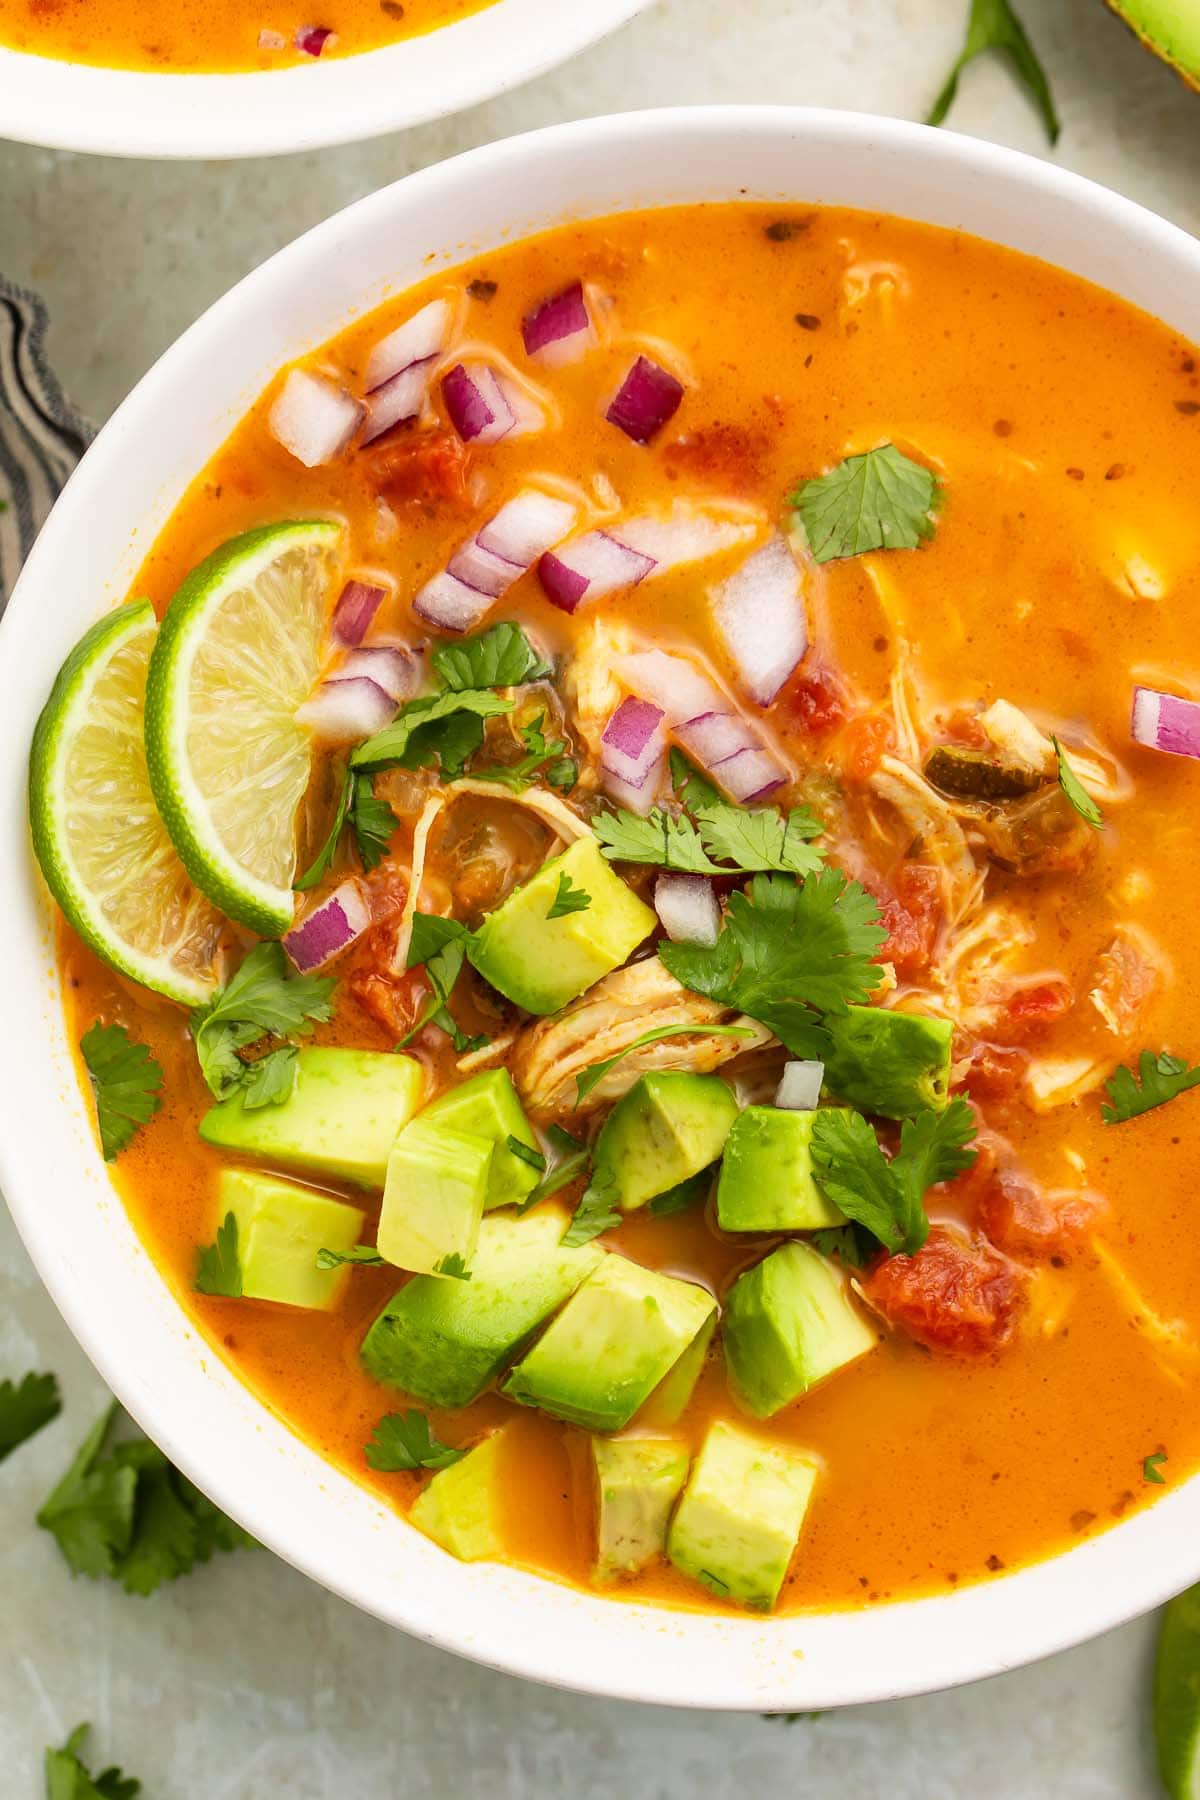 A close-up of a bowl of Whole30 chicken tortilla-less soup on a table.